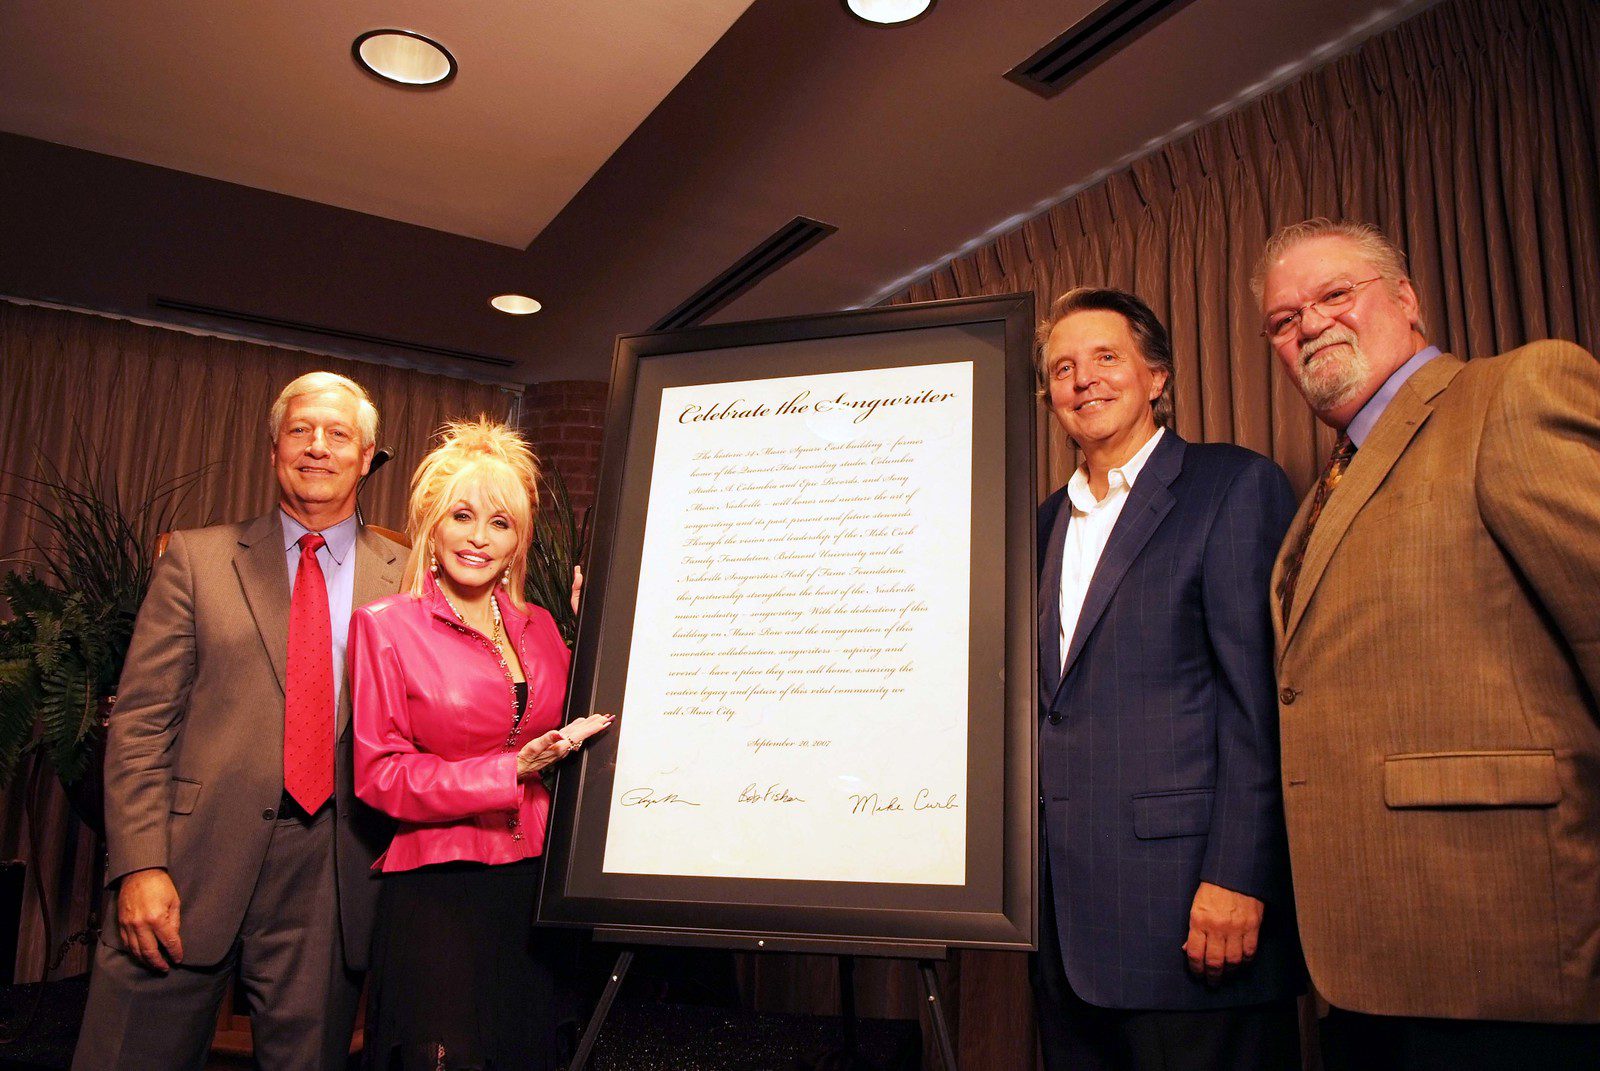 Dr. Fisher, Dolly Parton and Mike Curb at 'Celebrate the Songwriter' event